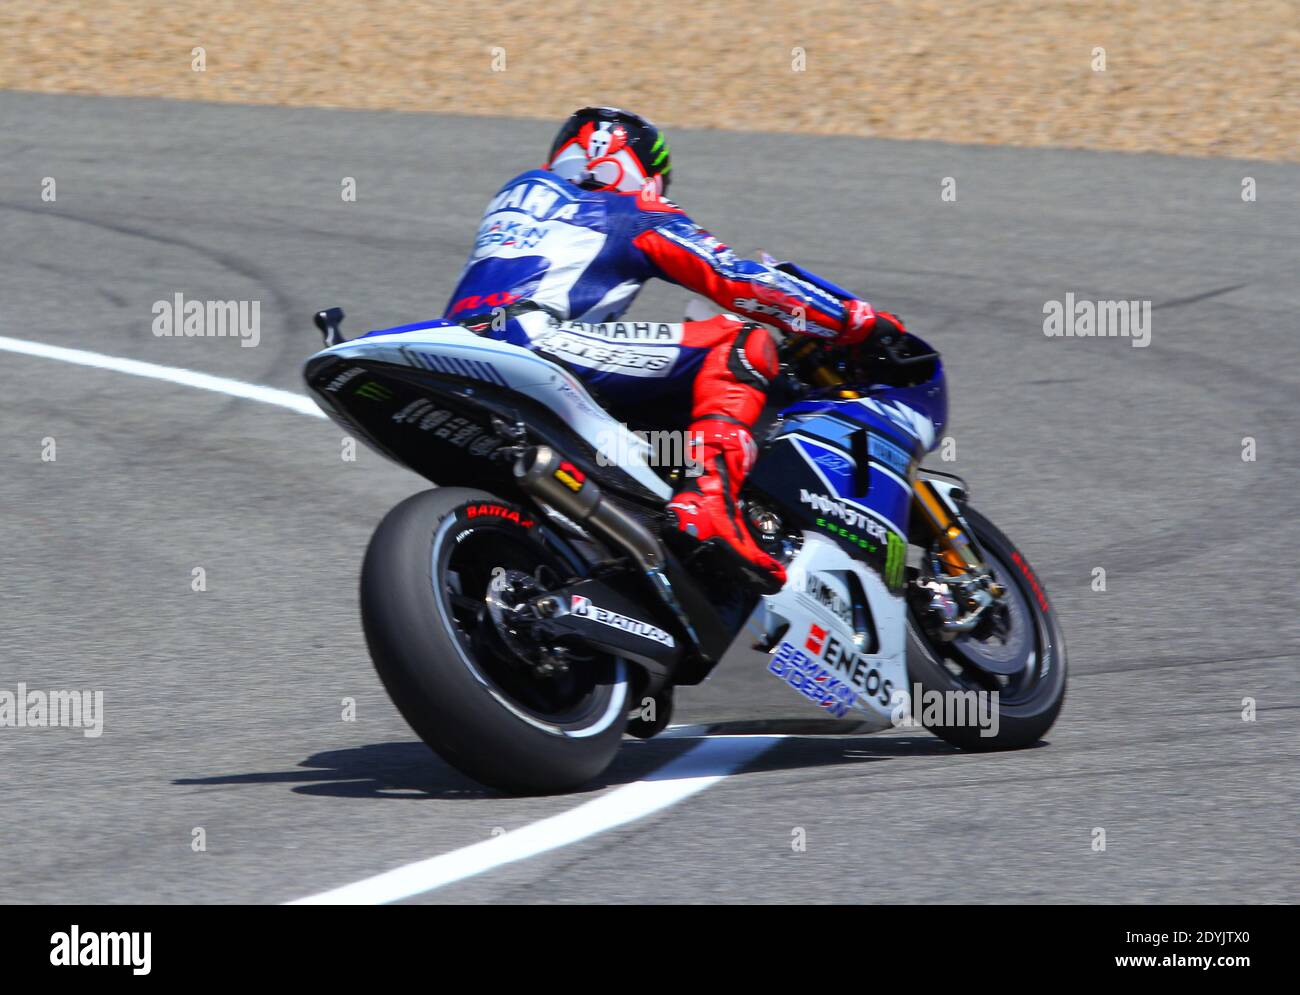 Jorge Lorenzo of Spain and Yamaha Factory Racing during the MotoGP Spain  Grand Prix Race at Circuito de Jerez in Jerez de la Frontera, Spain on May  5, 2013. Photo by Giuliano